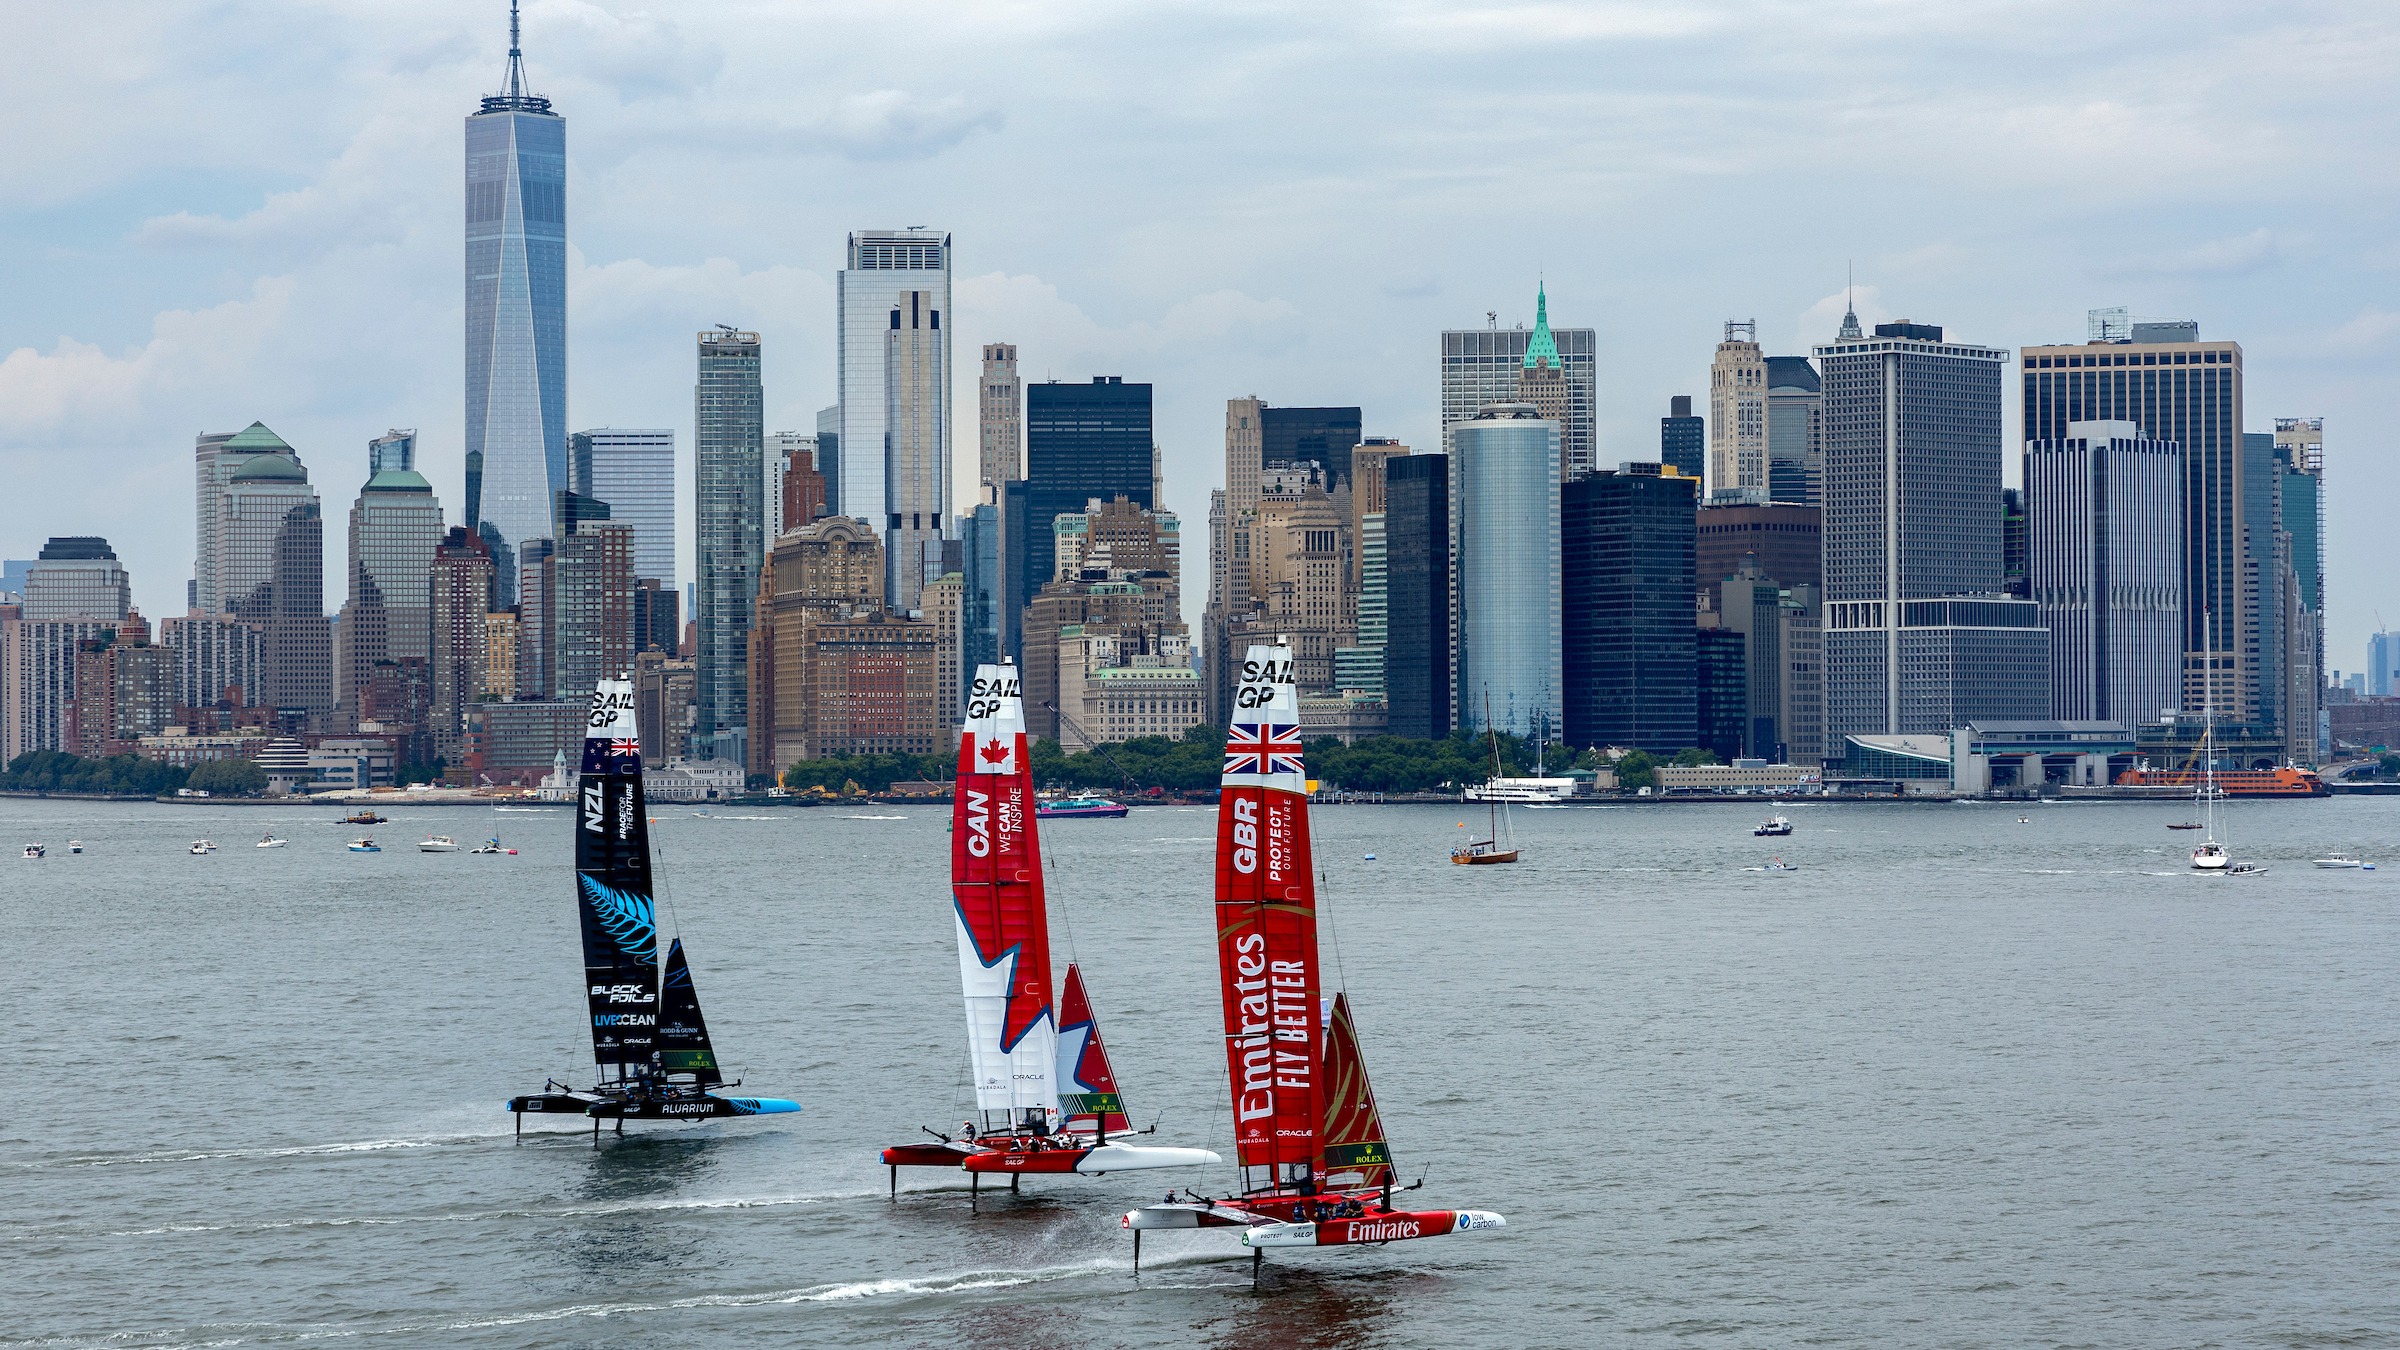 Season 4 // Emirates GBR, Canada and New Zealand with New York backdrop in Final